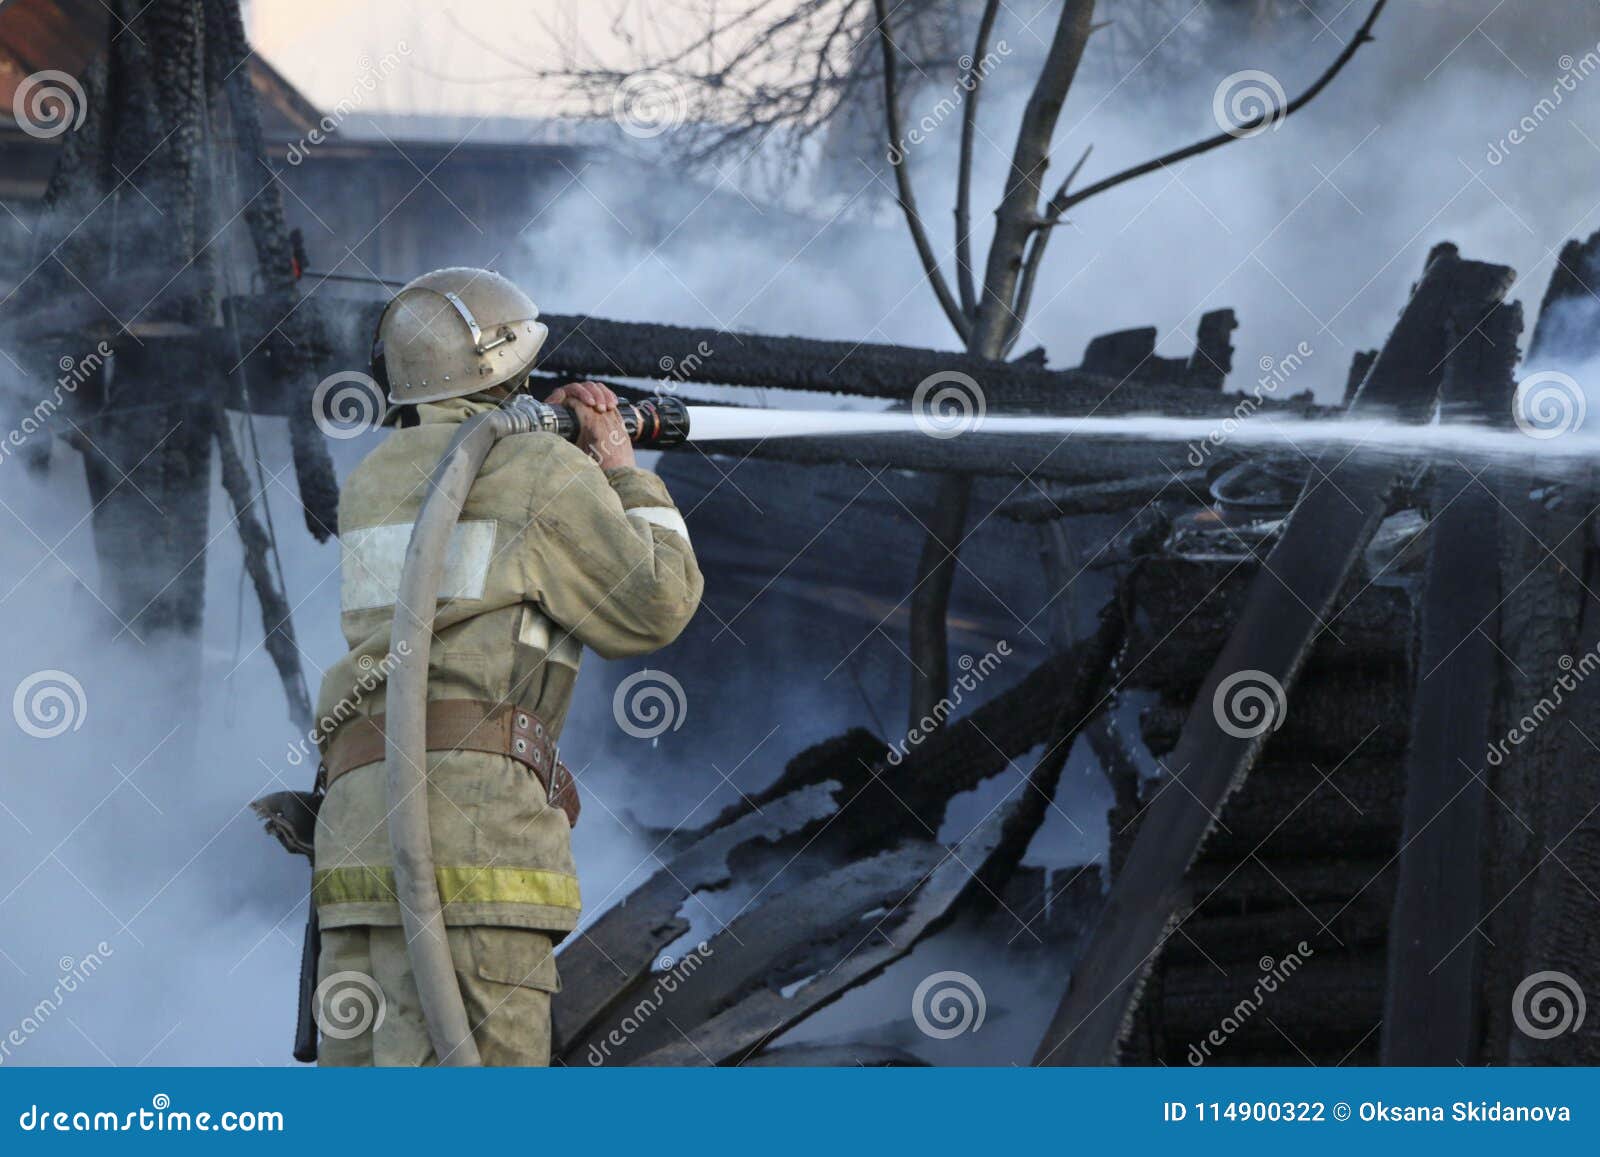 firefighter extinguishes the fire. fireman holding a hose with water, watering a strong stream of burning wooden structure in the